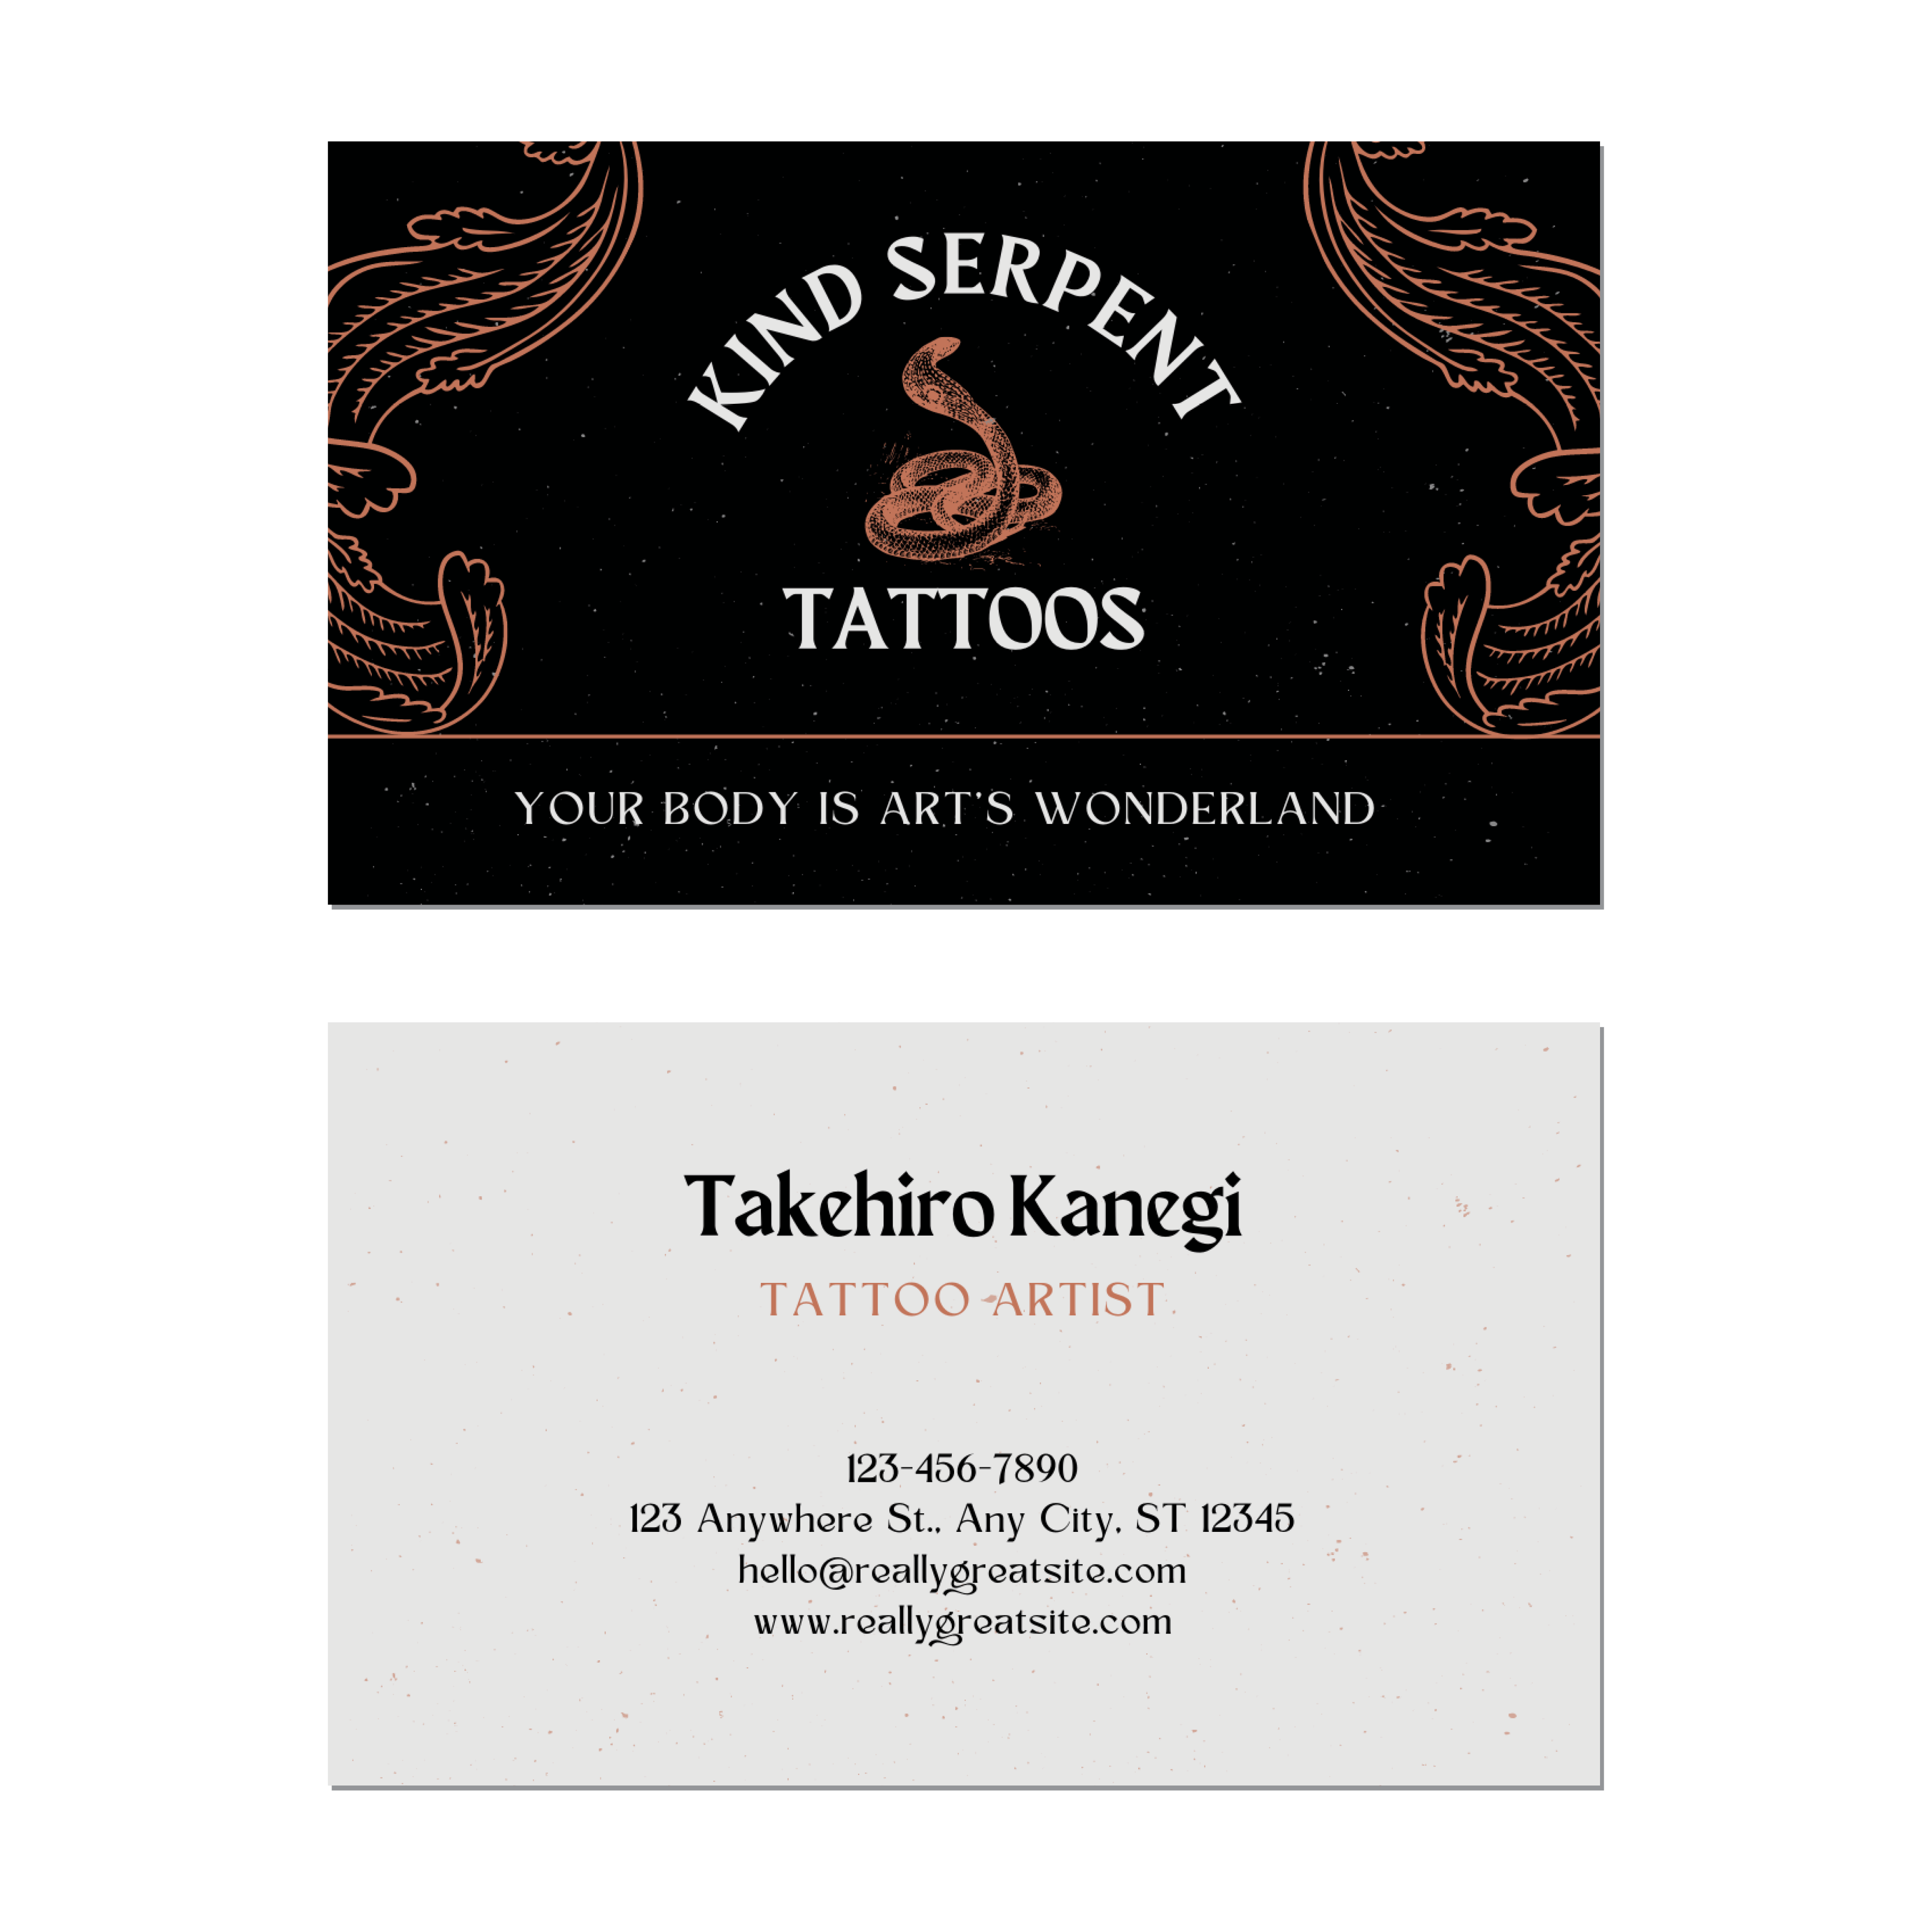 Business cards and vouchers for a tattoo studio :: Behance